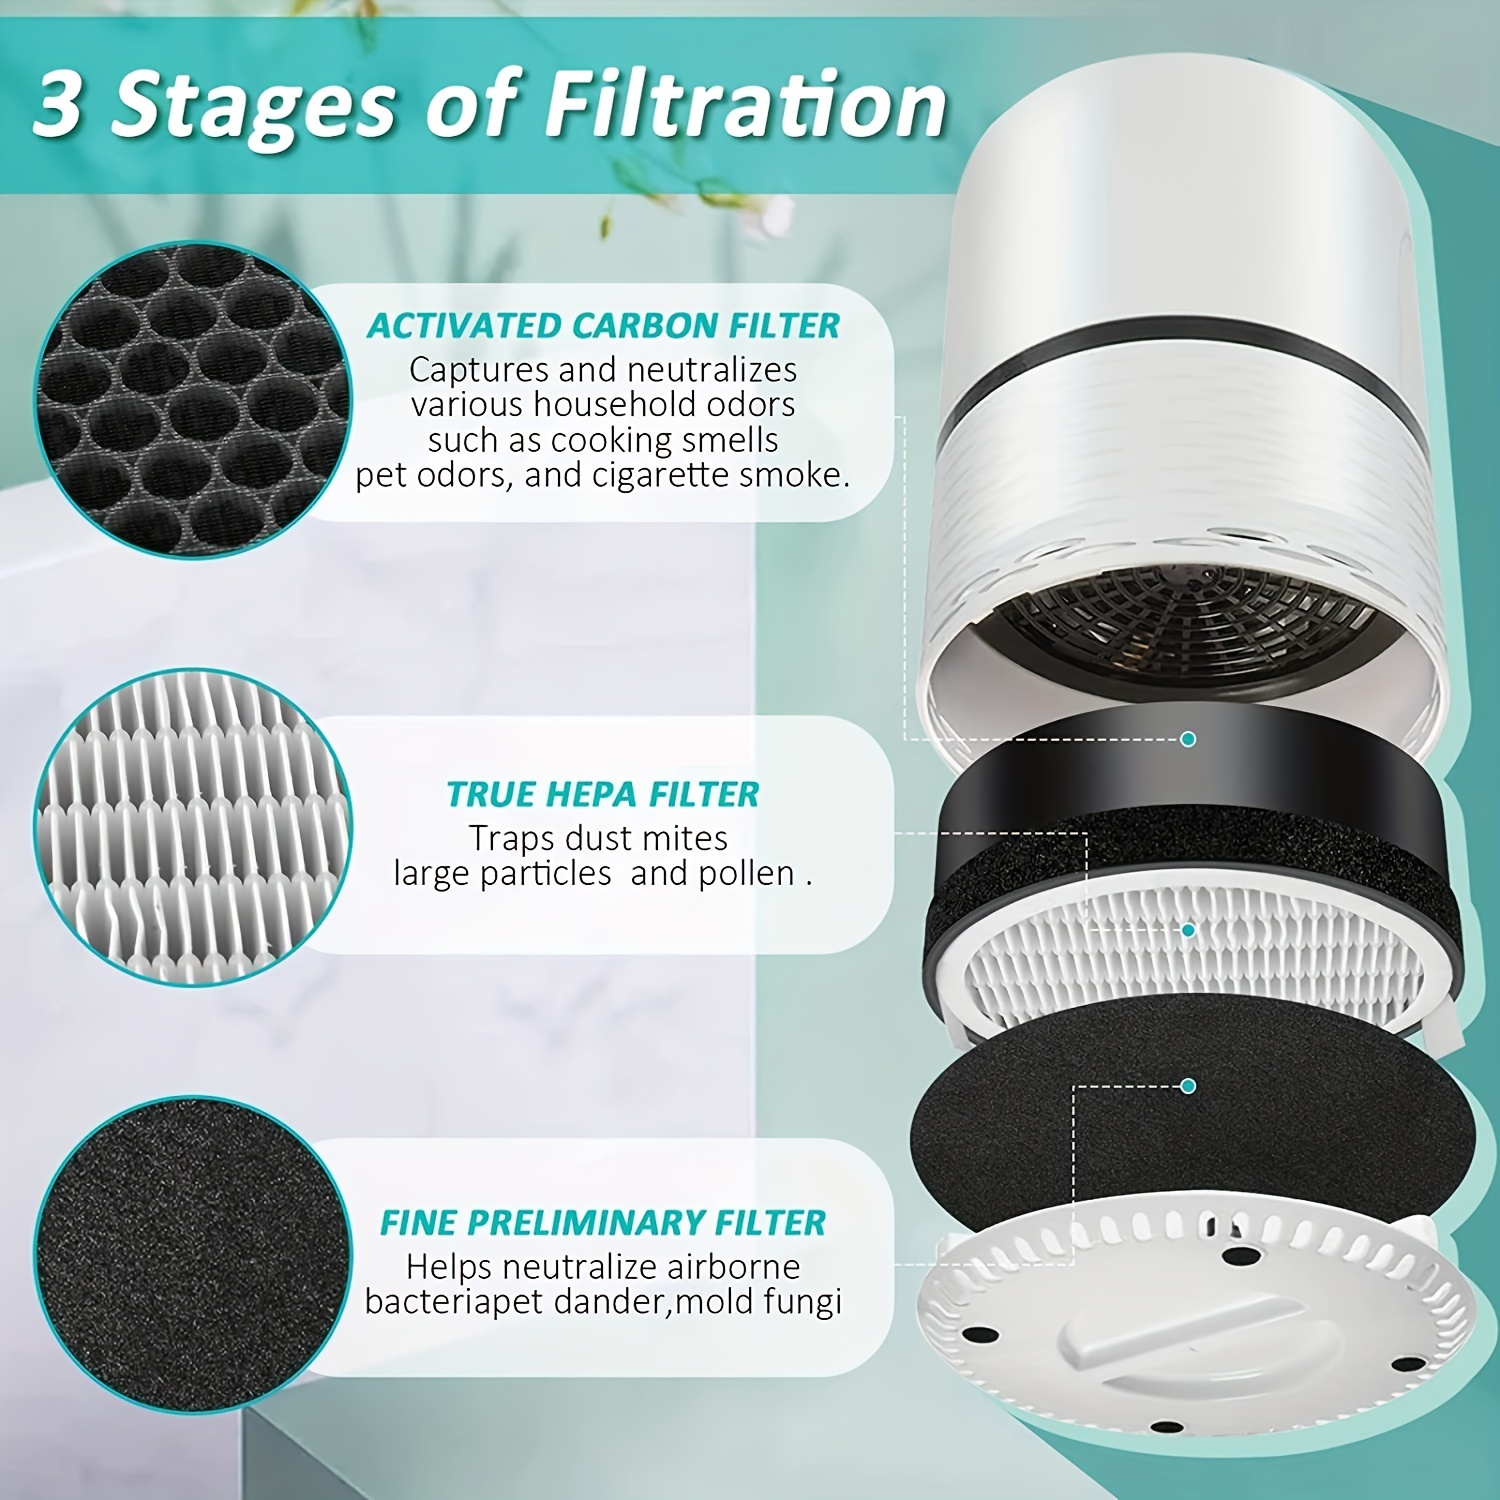 Air Filter Levoit Air Purifier Filter LV- H132 HEPA Filter with Carbon -  China Air Filter, H11 Filter